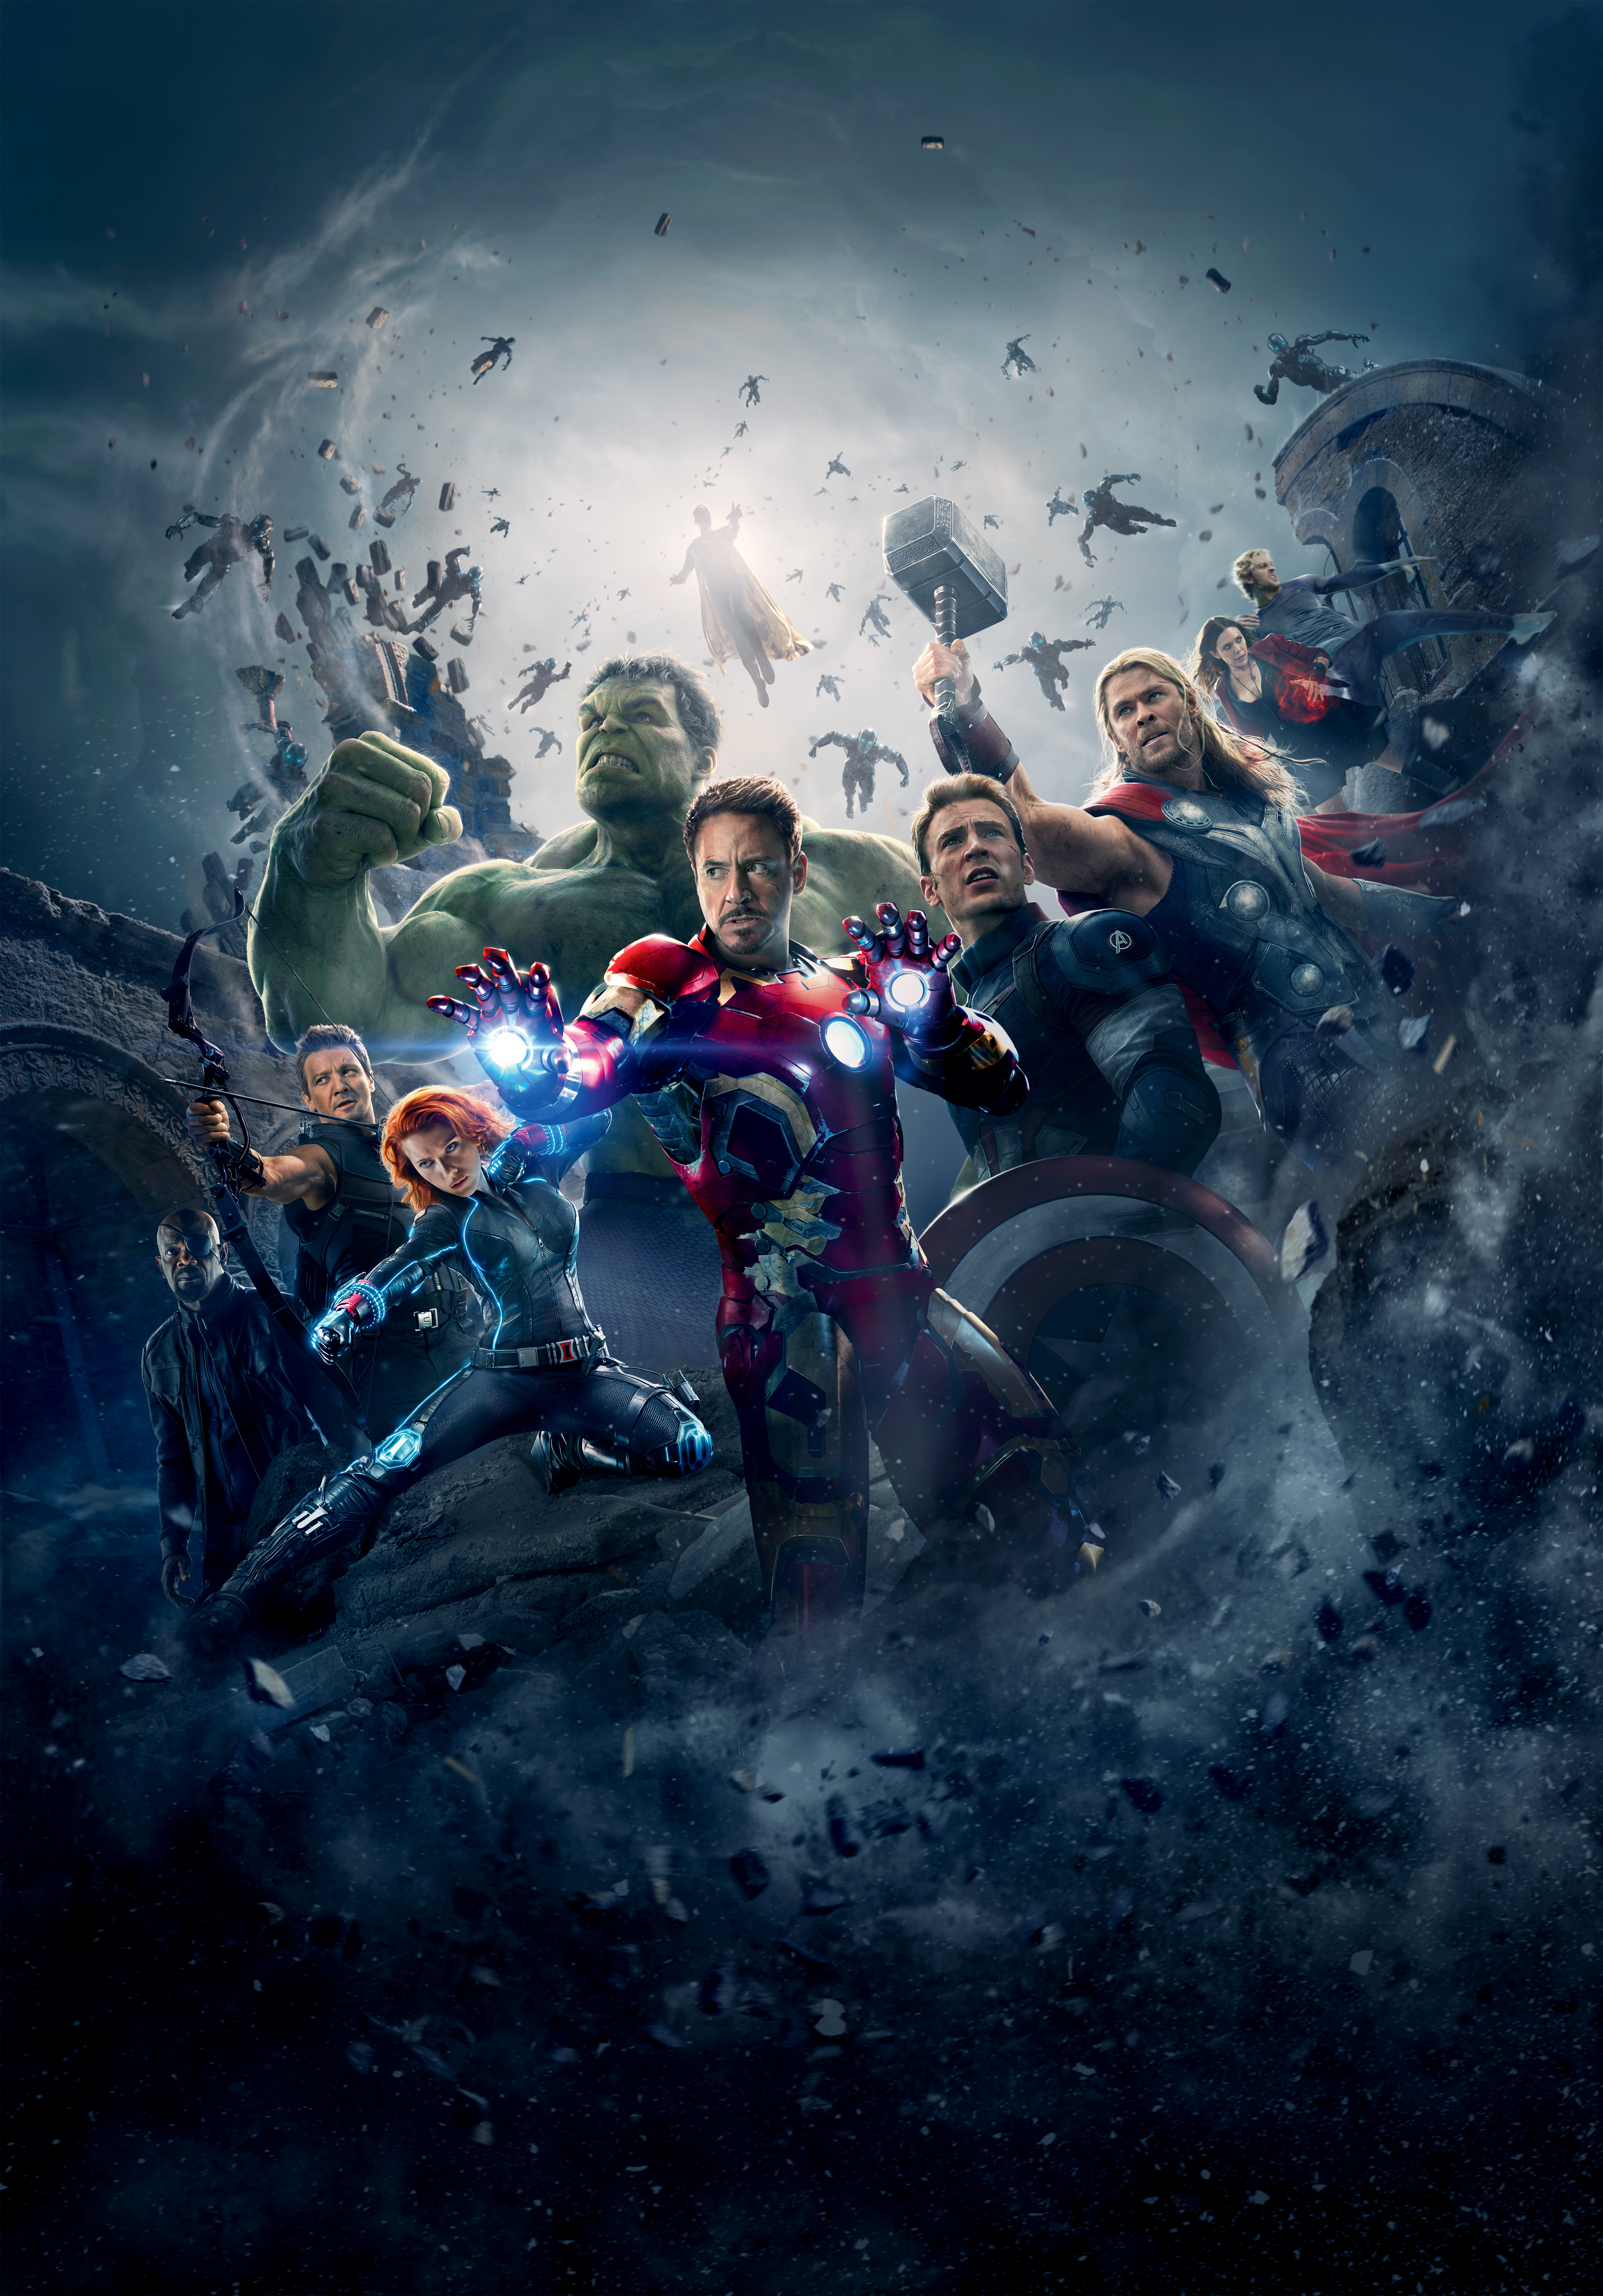 Avengers Age Of Ultron Hi Res Textless Poster By Ihaveanawesomename On Deviantart